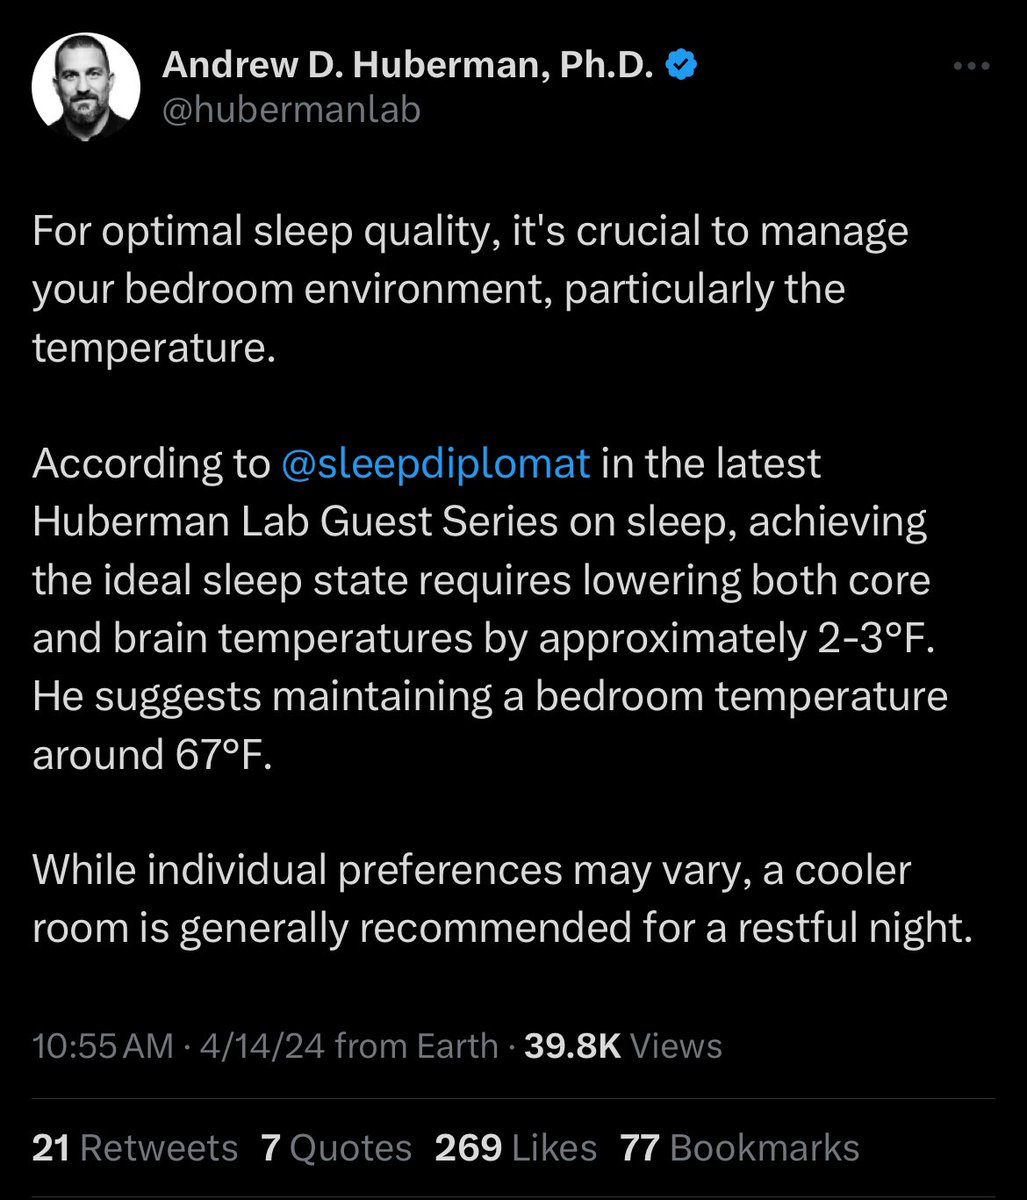 A mixture of reasonsable sleep advice with utter nonsense. Lower brain temperature by 3°F … um wut? Is this TTM? What a joke.